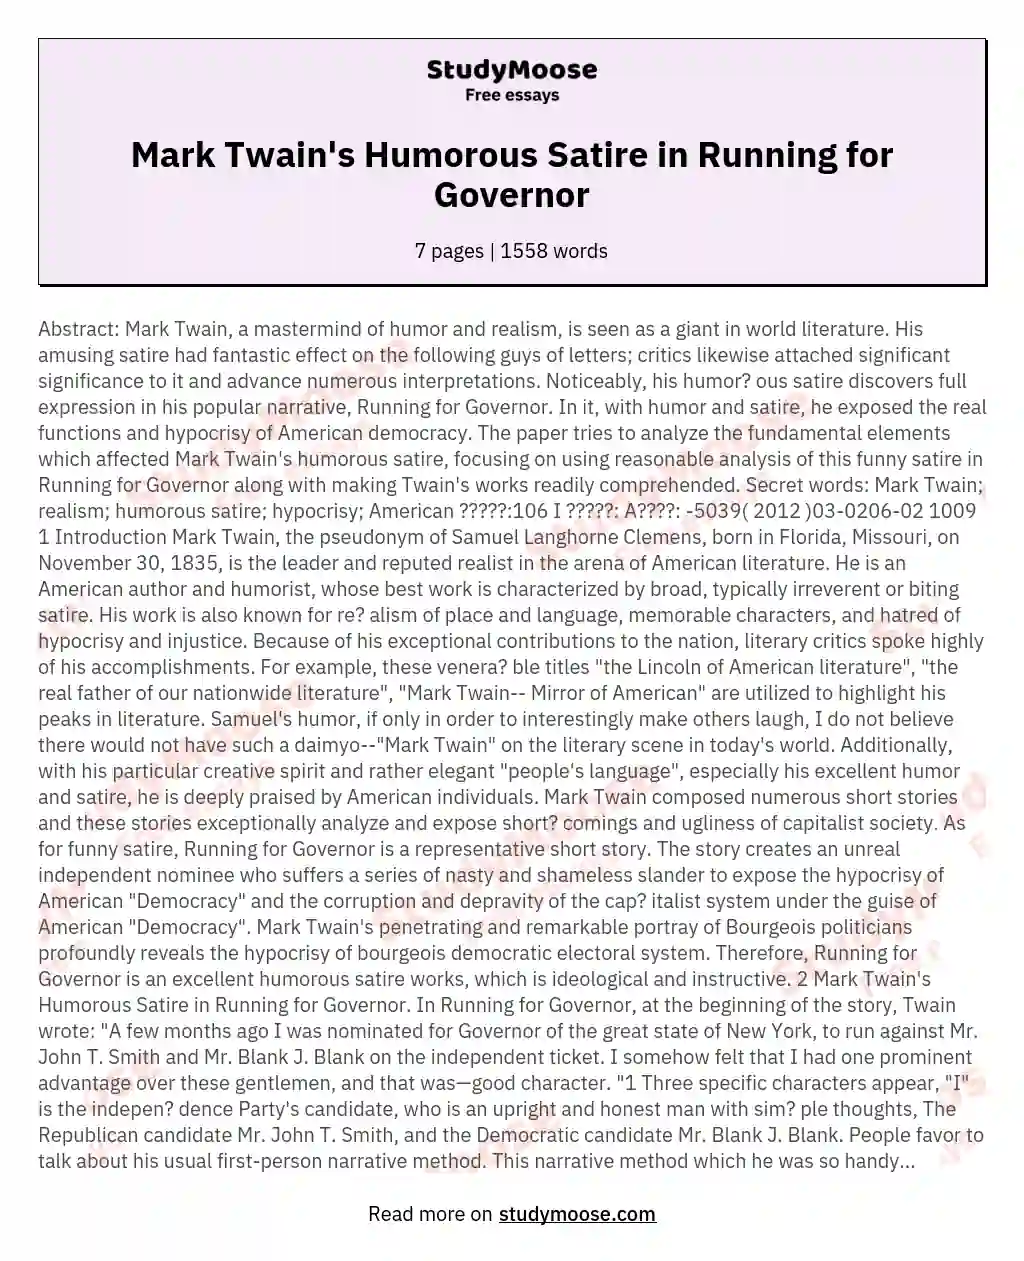 Mark Twain's Humorous Satire in Running for Governor essay